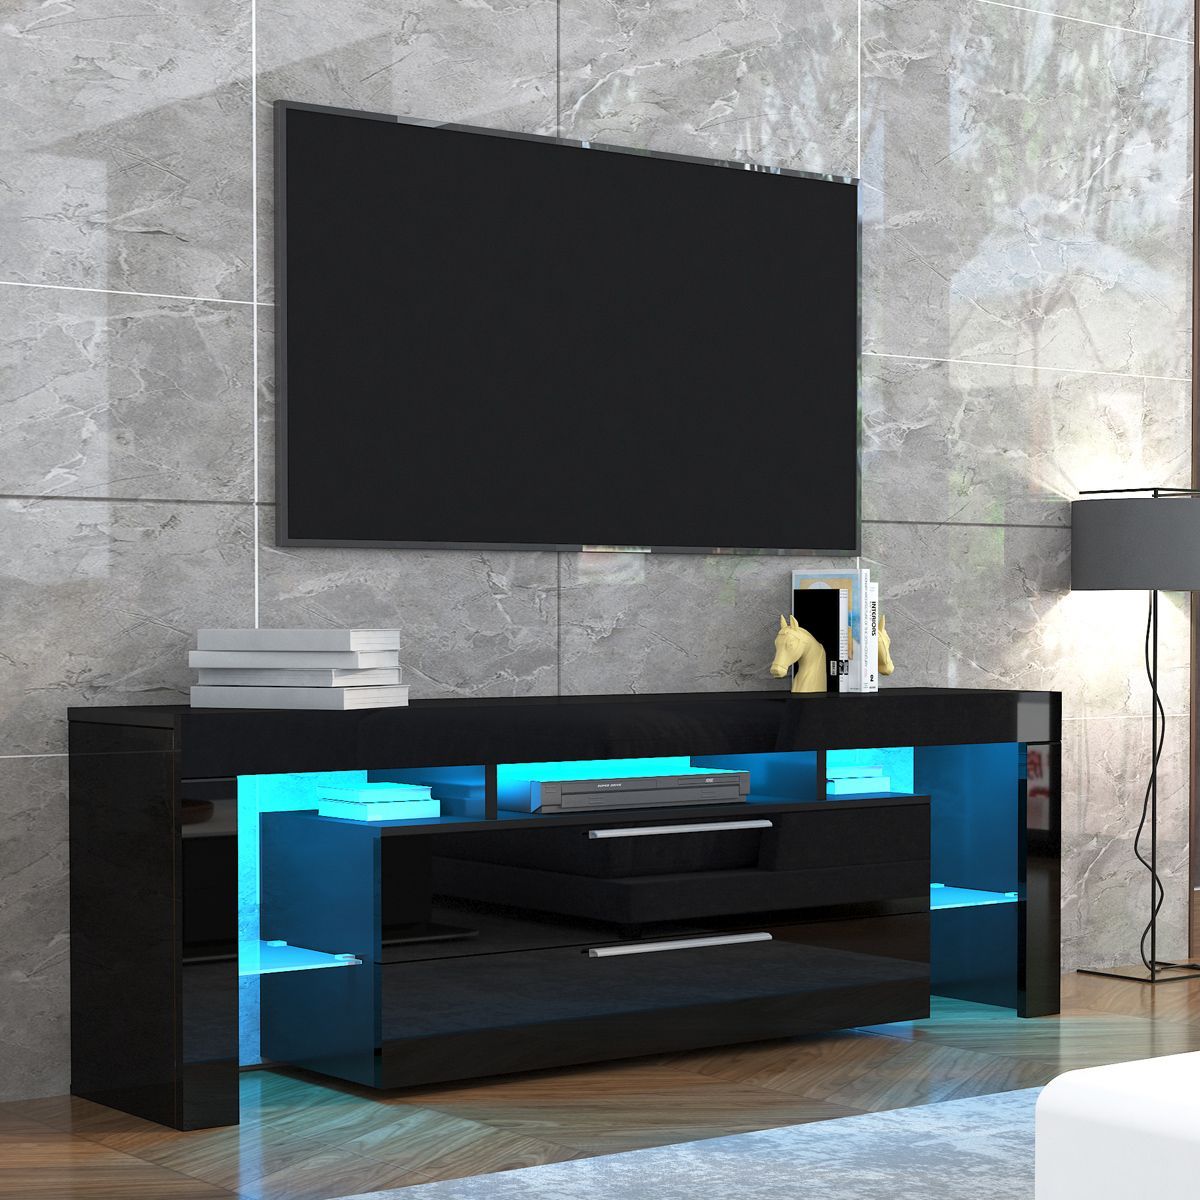 TV Stand Entertainment Unit 2 Drawers Storage Cabinet Wood Furniture ...